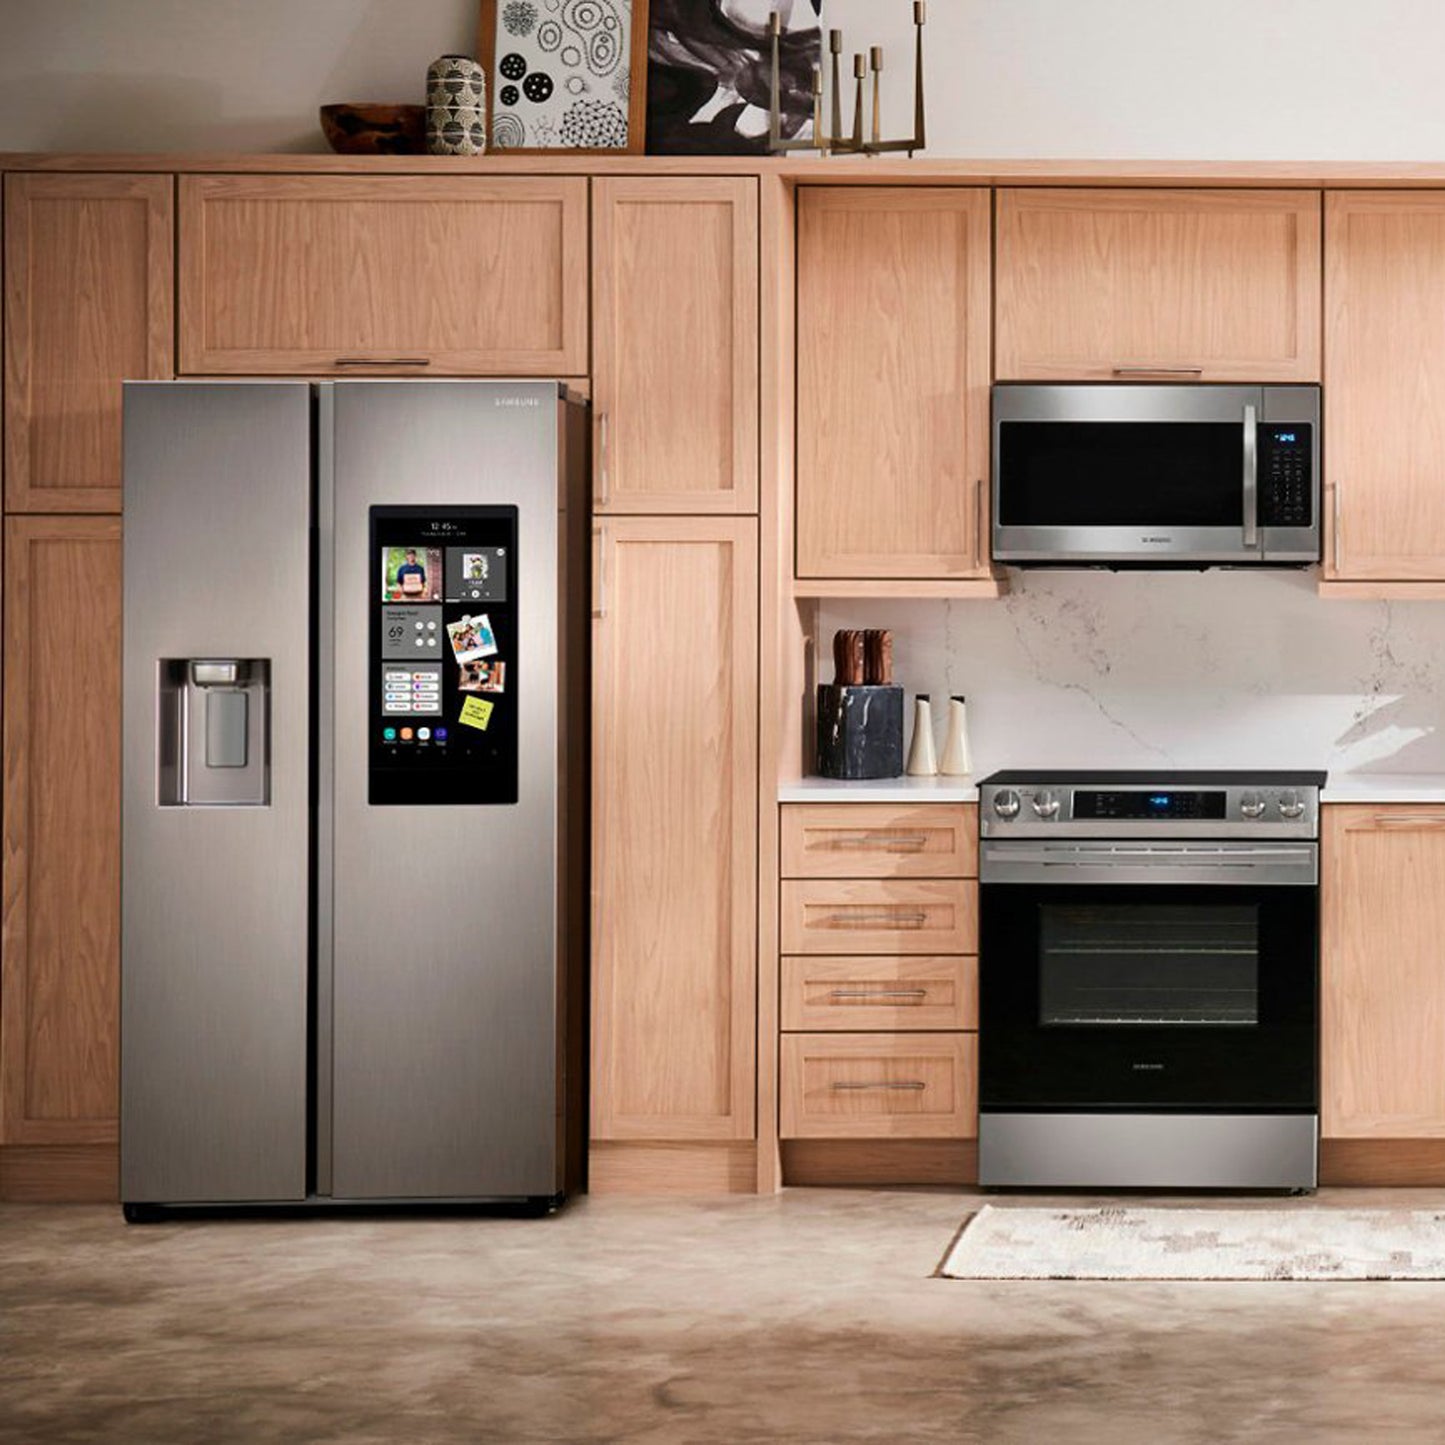 26.7 cu. ft. Large Capacity Side-by-Side Refrigerator with Touch Screen Family Hub™ in Stainless Steel.